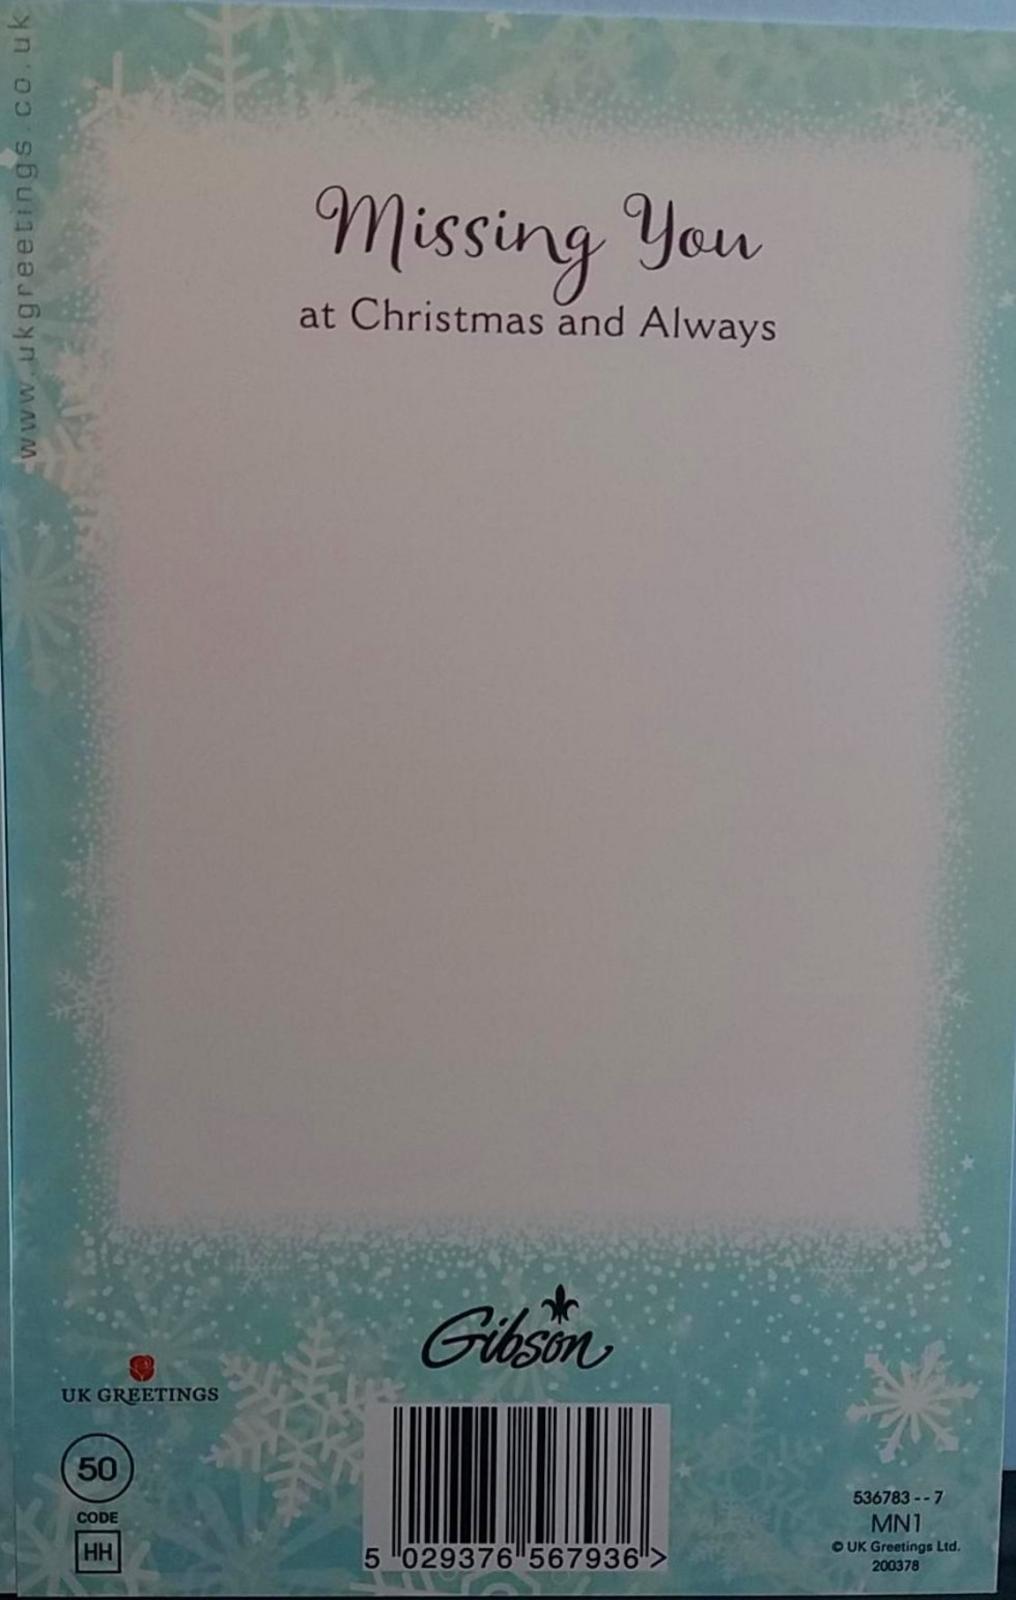 DAUGHTER Special Words Christmas Grave Memorial Card Remembrance